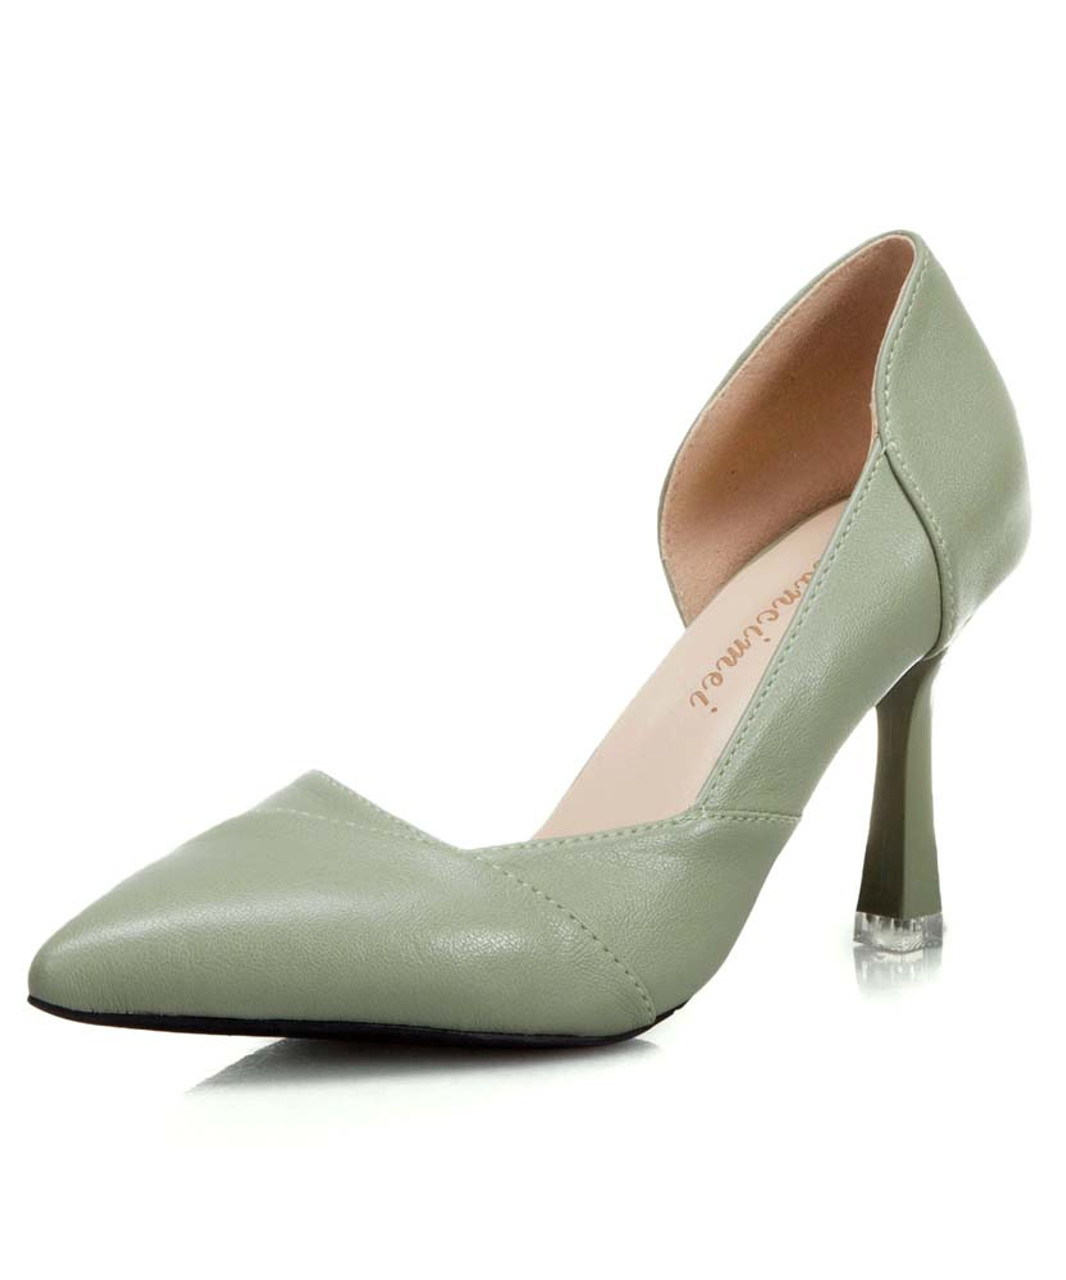 Dreampairs Woman's High-heel Dress Shoes - clothing & accessories - by  owner - apparel sale - craigslist